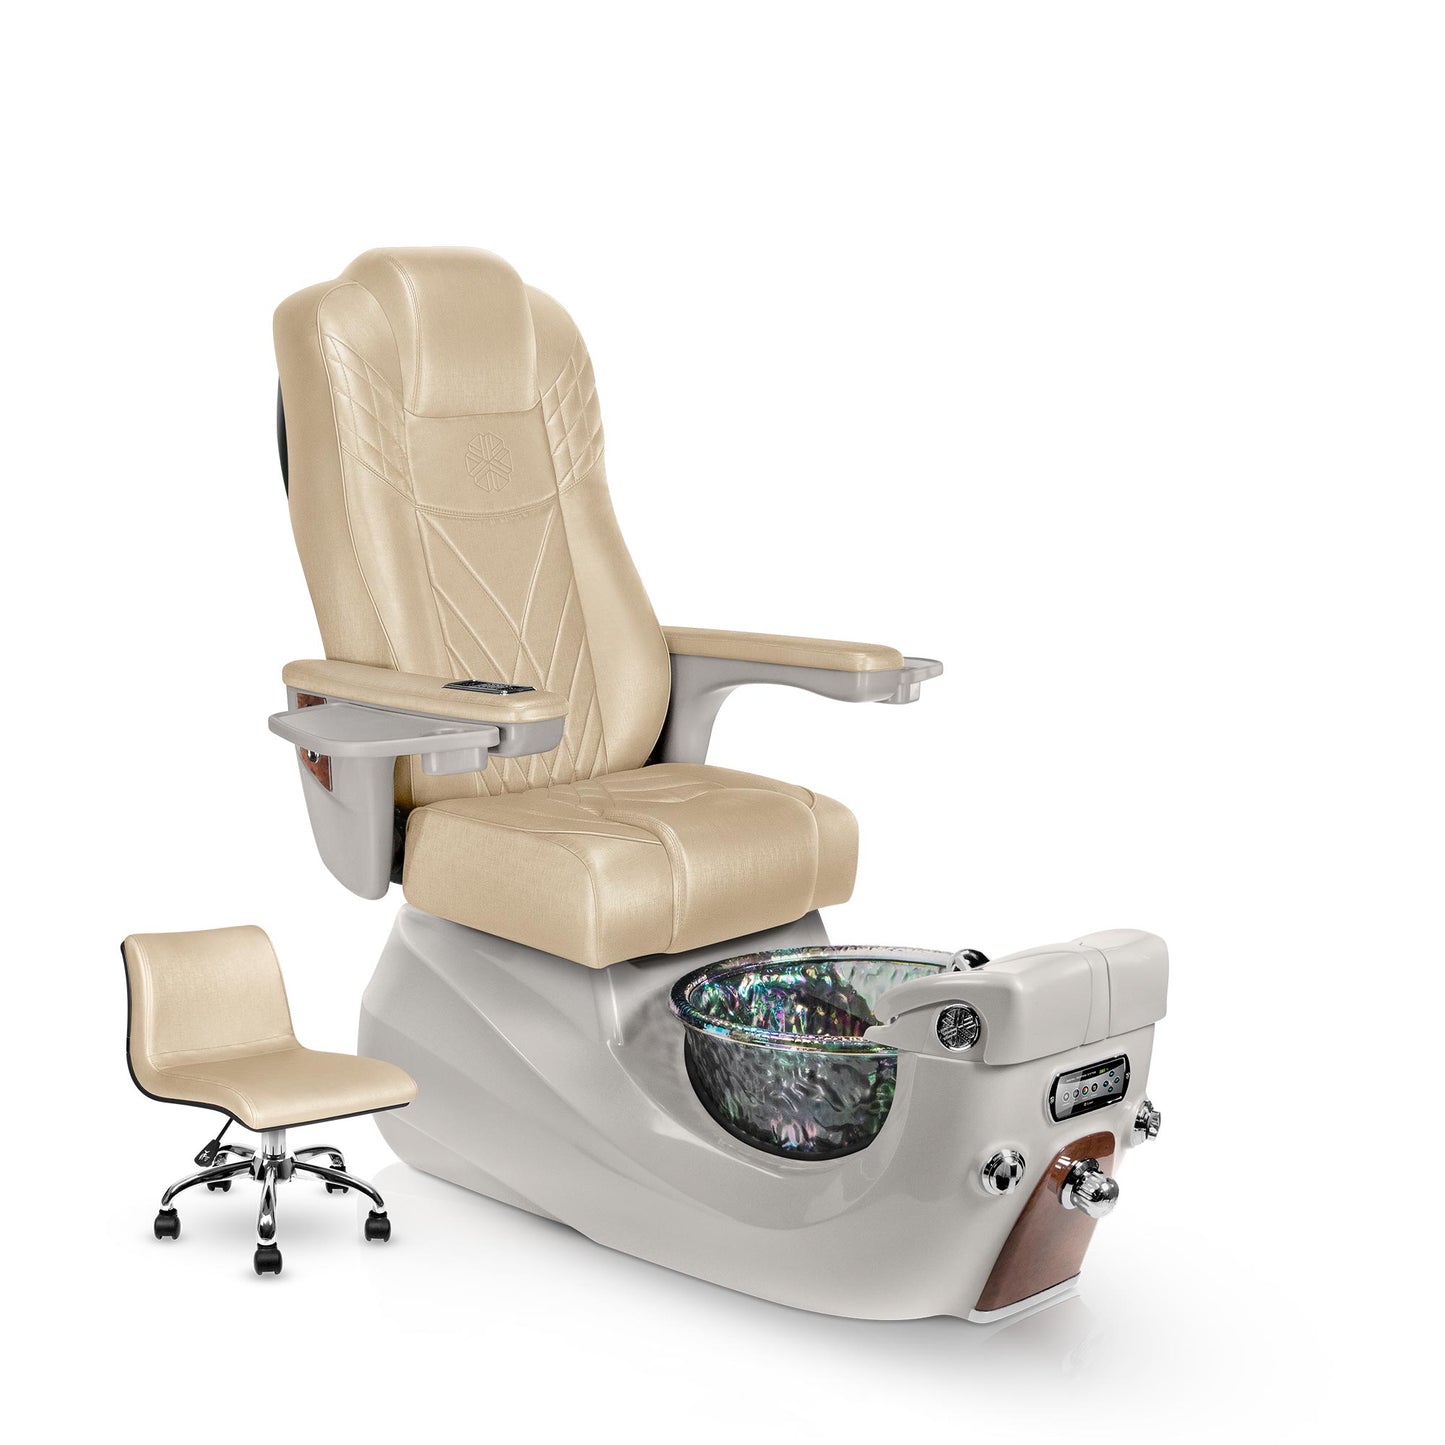 Lexor LIBERTÉ pedicure chair with glazed gold cushion and sandstone spa base